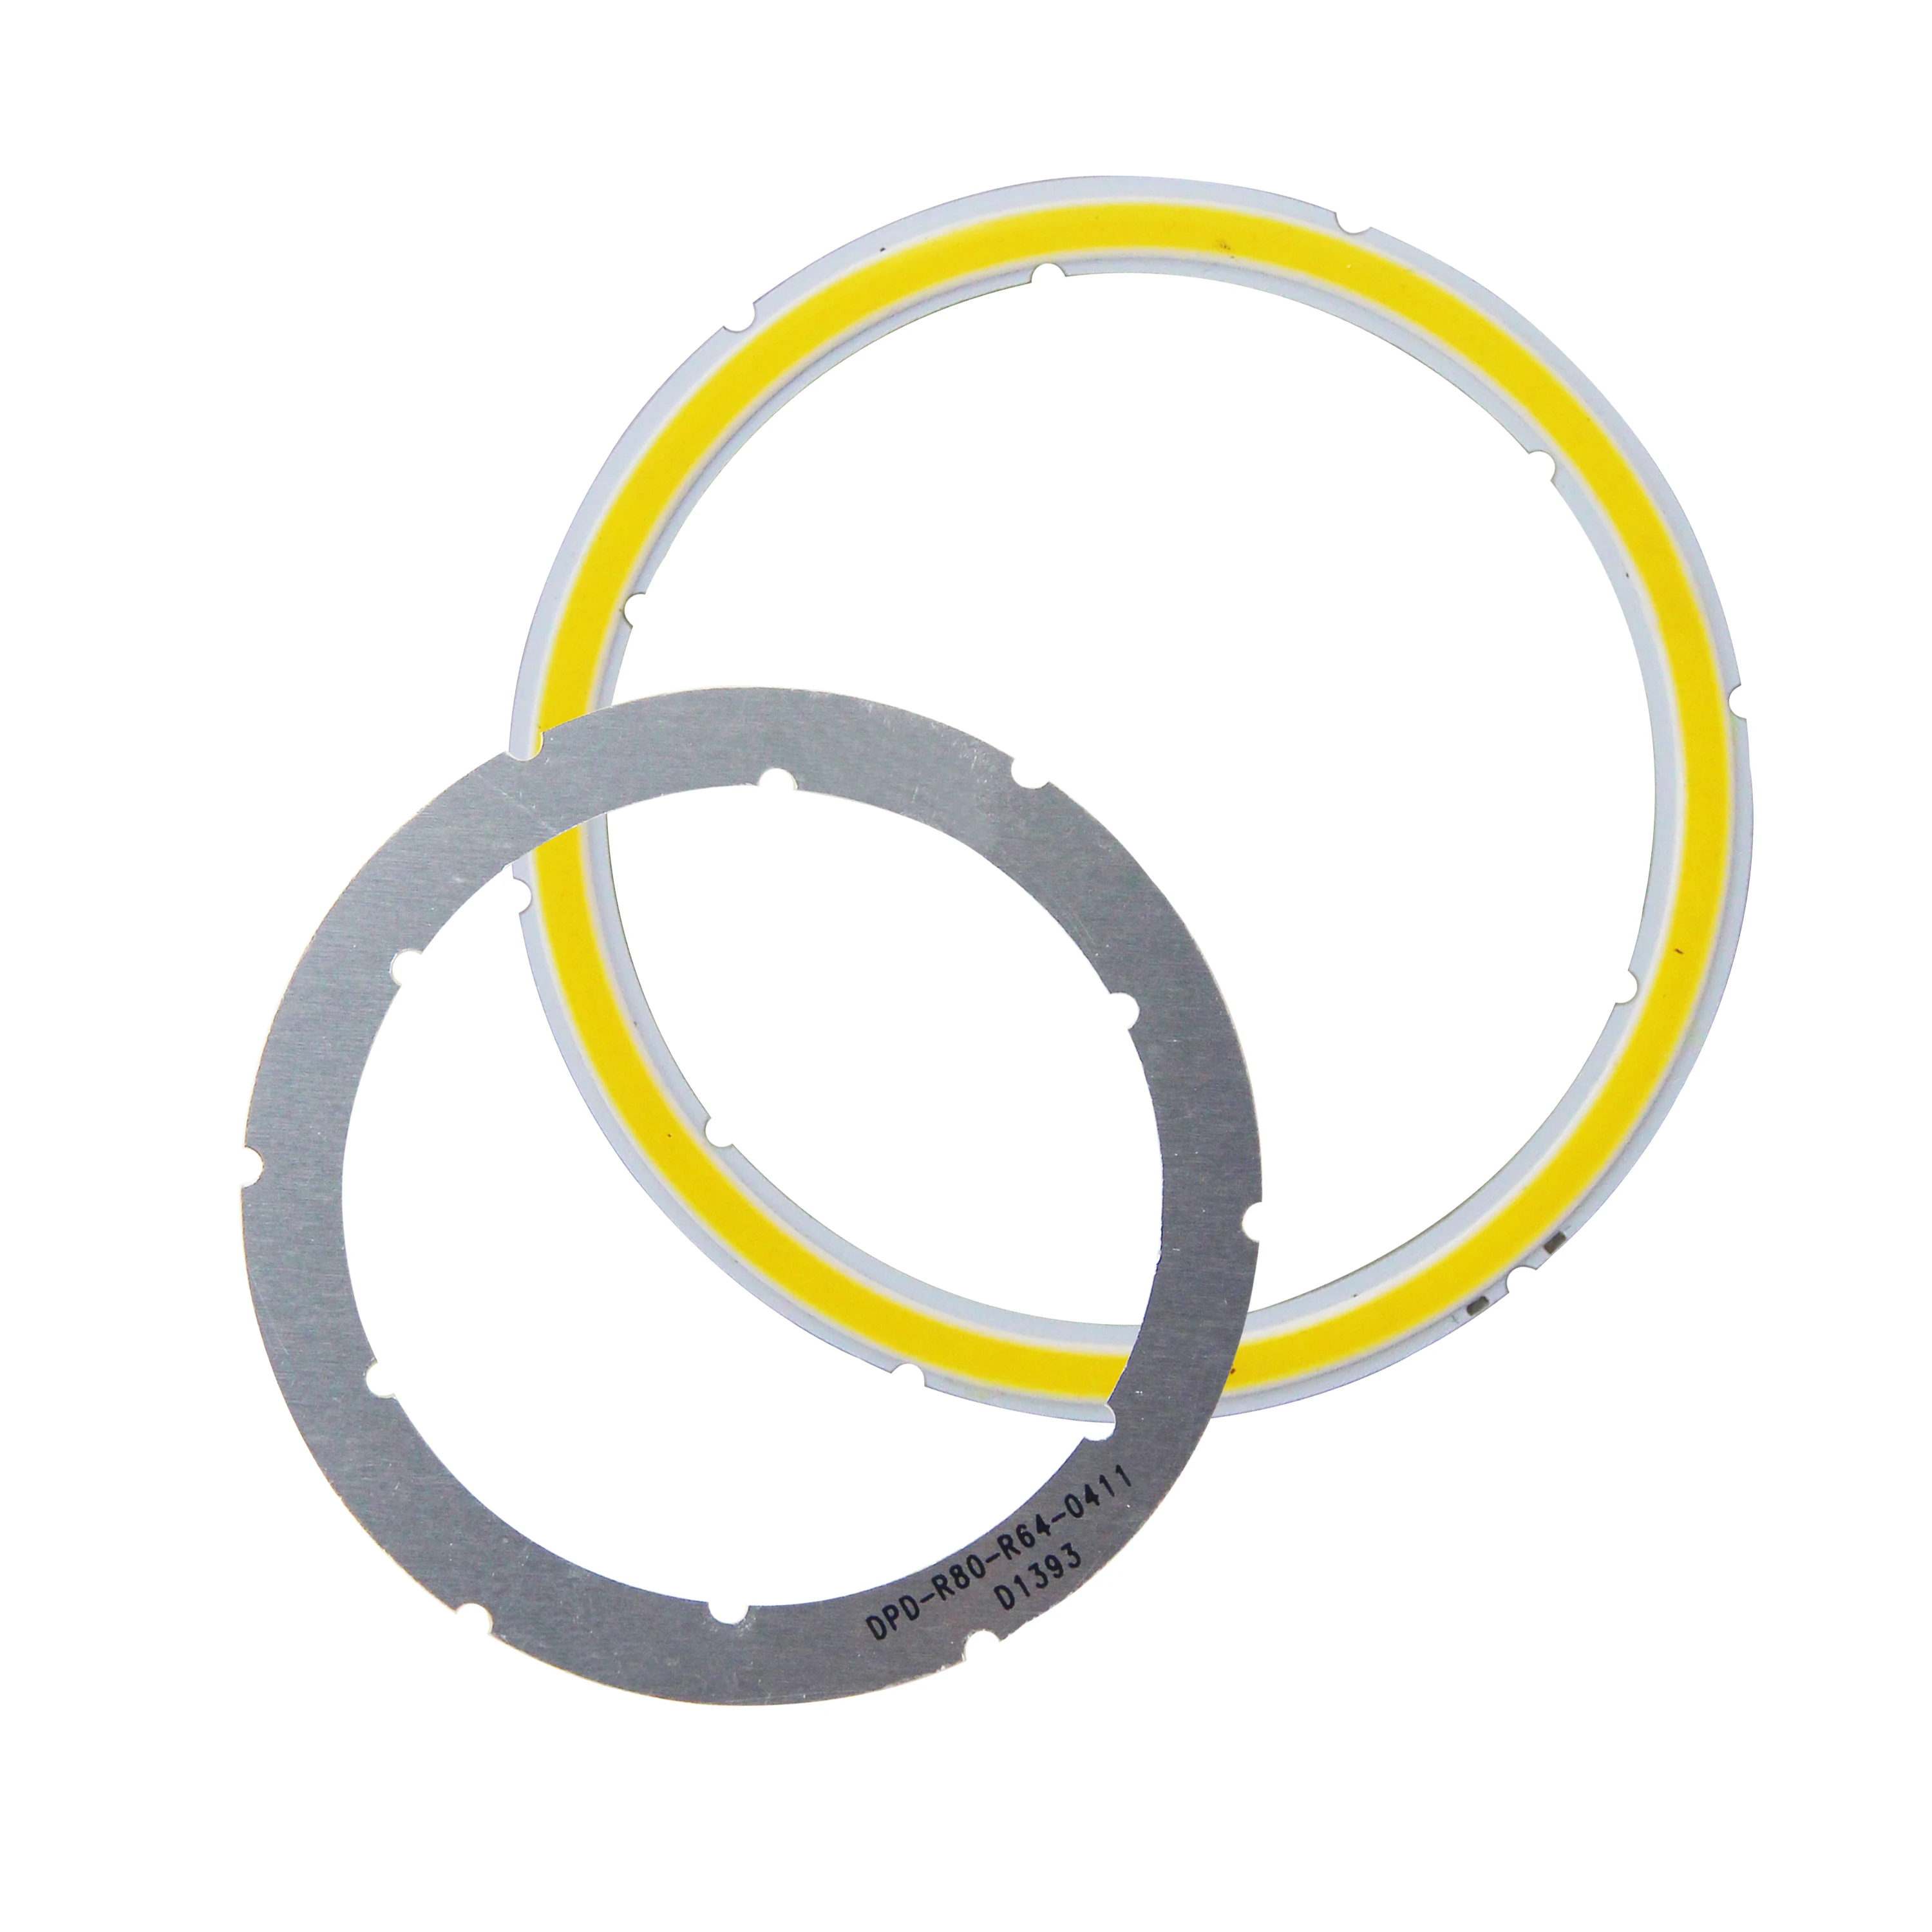 12V DC annular cob led light source ring shape 10W 15w angle eye 30mm 120mm Warm cold white Ice blue cob chip for DIY lamp